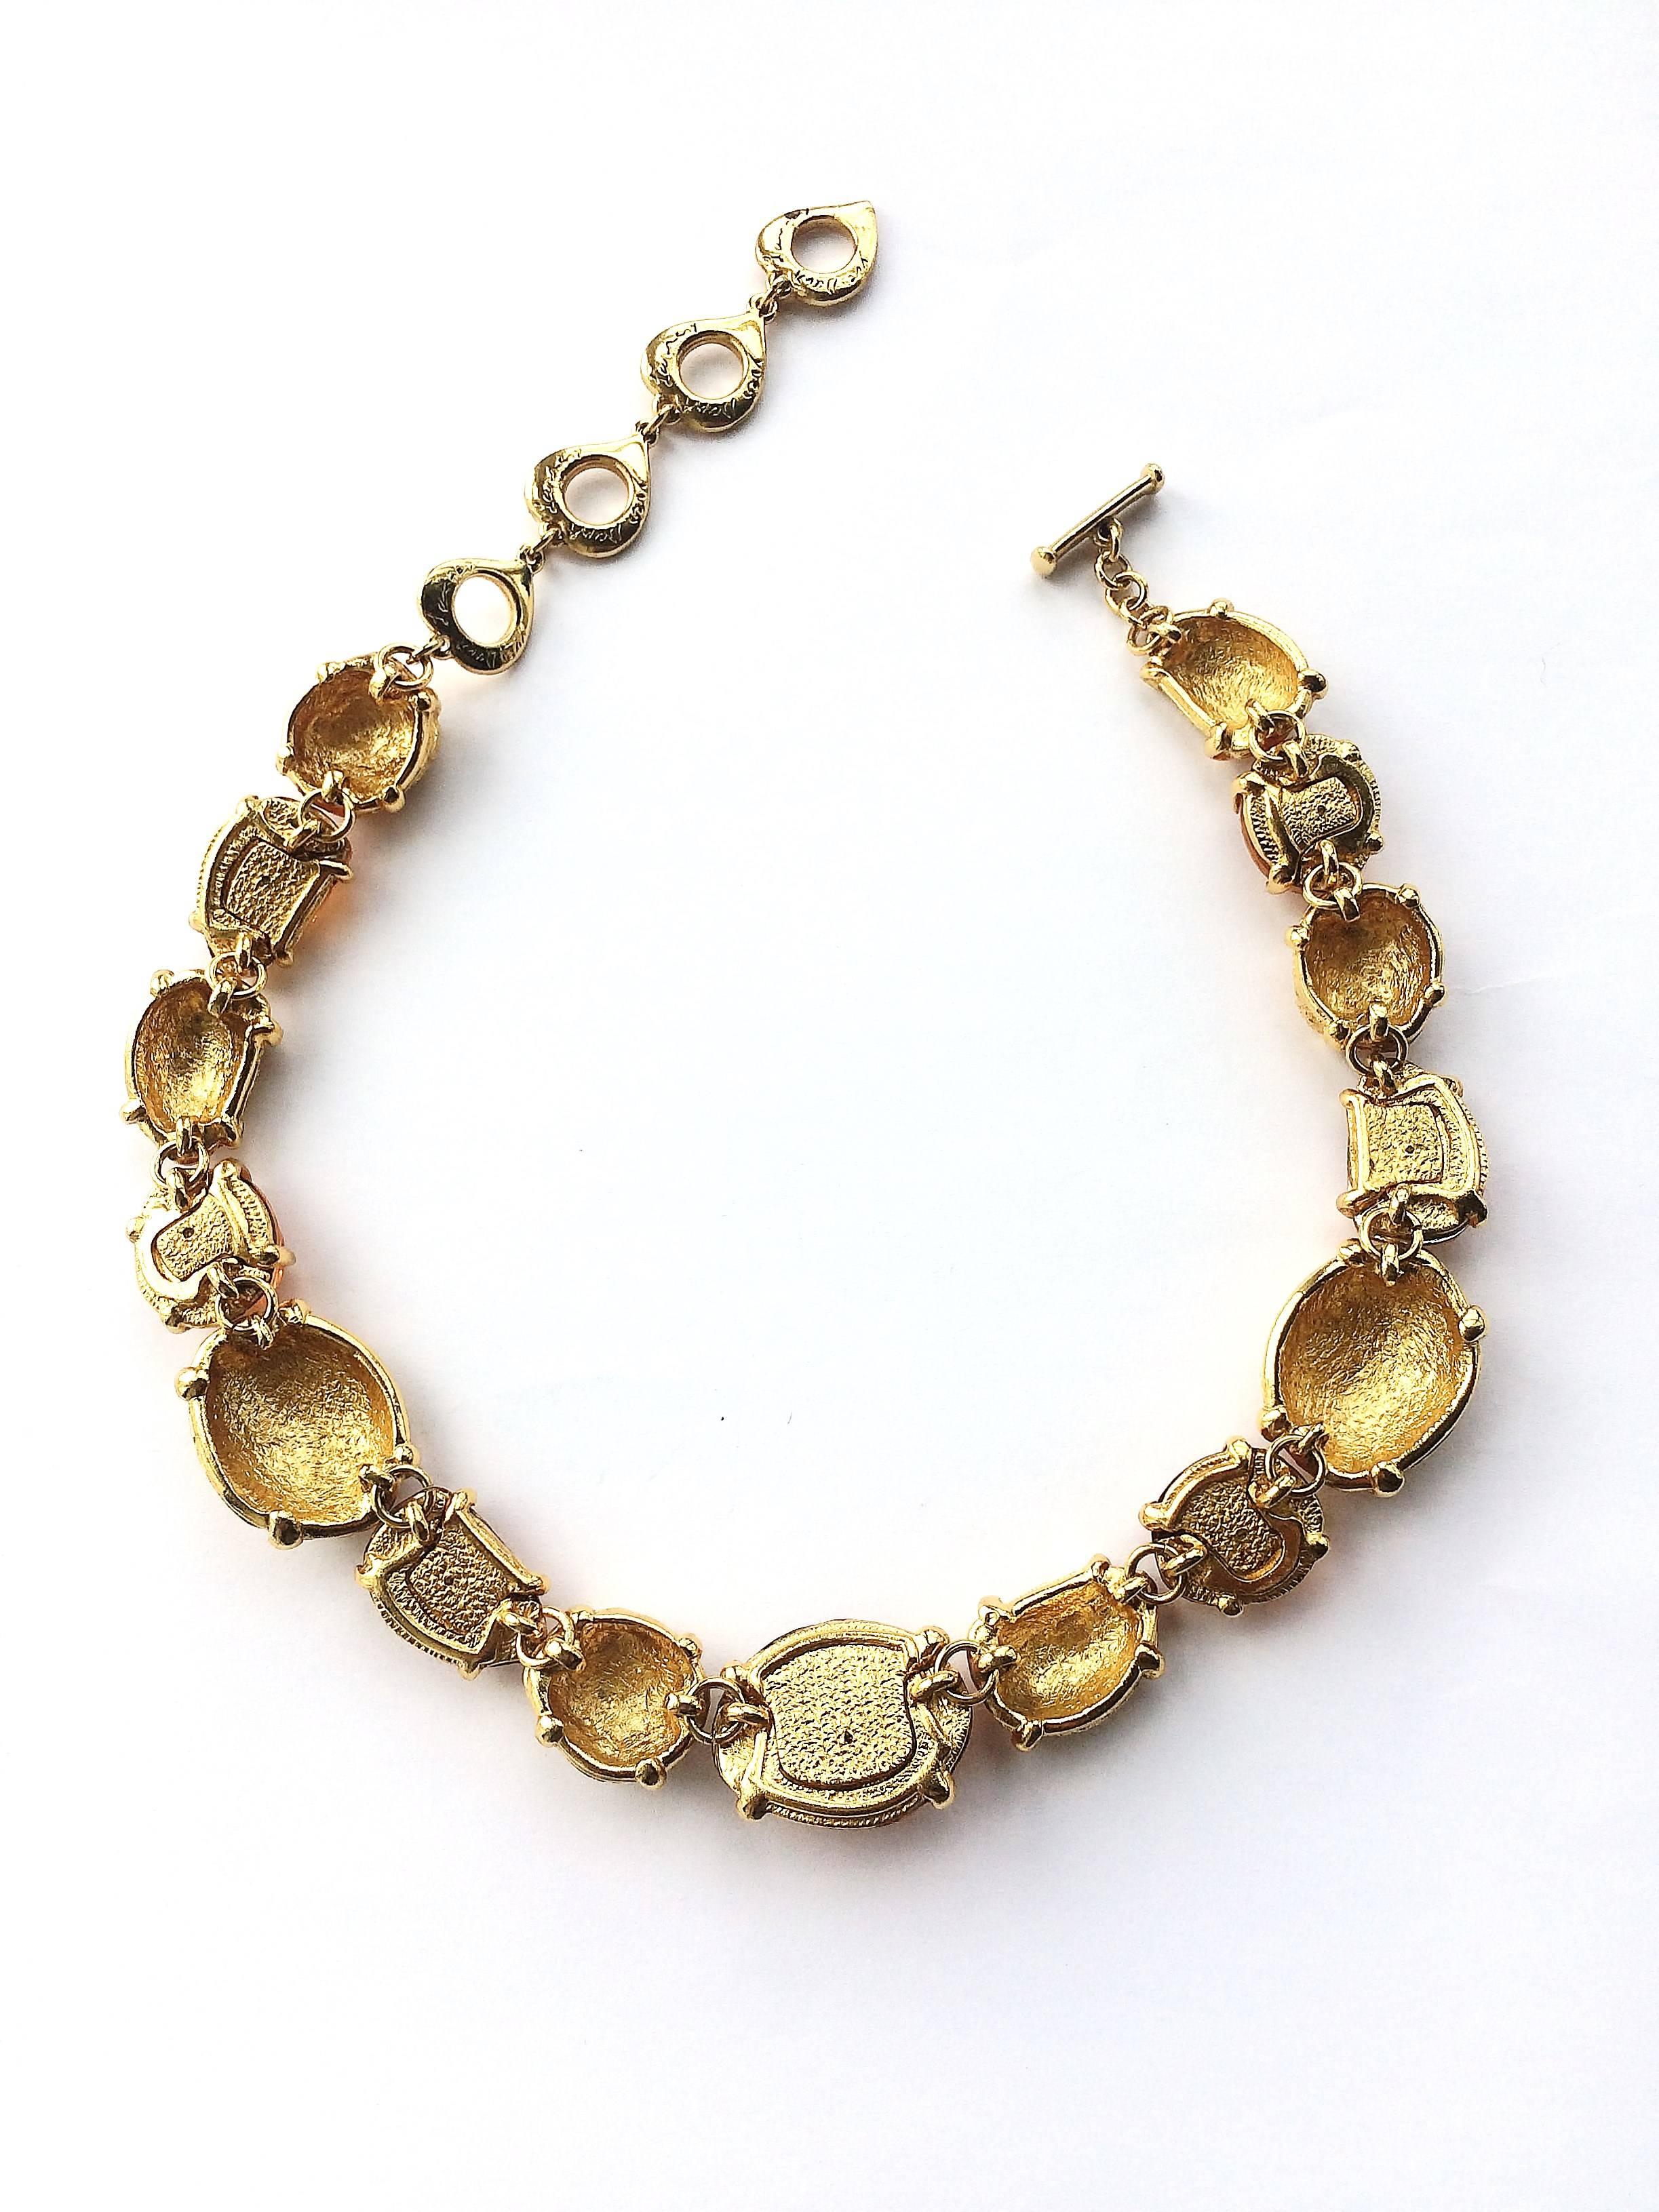 A beautiful and warming necklace from Yves Saint Laurent, with topaz 'nuggets' and textured gilt 'nuggets' of varying shapes and sizes,, alternatively placed around the neckline. With the signature signed 'heart' clasp/fitting, this is a piece of